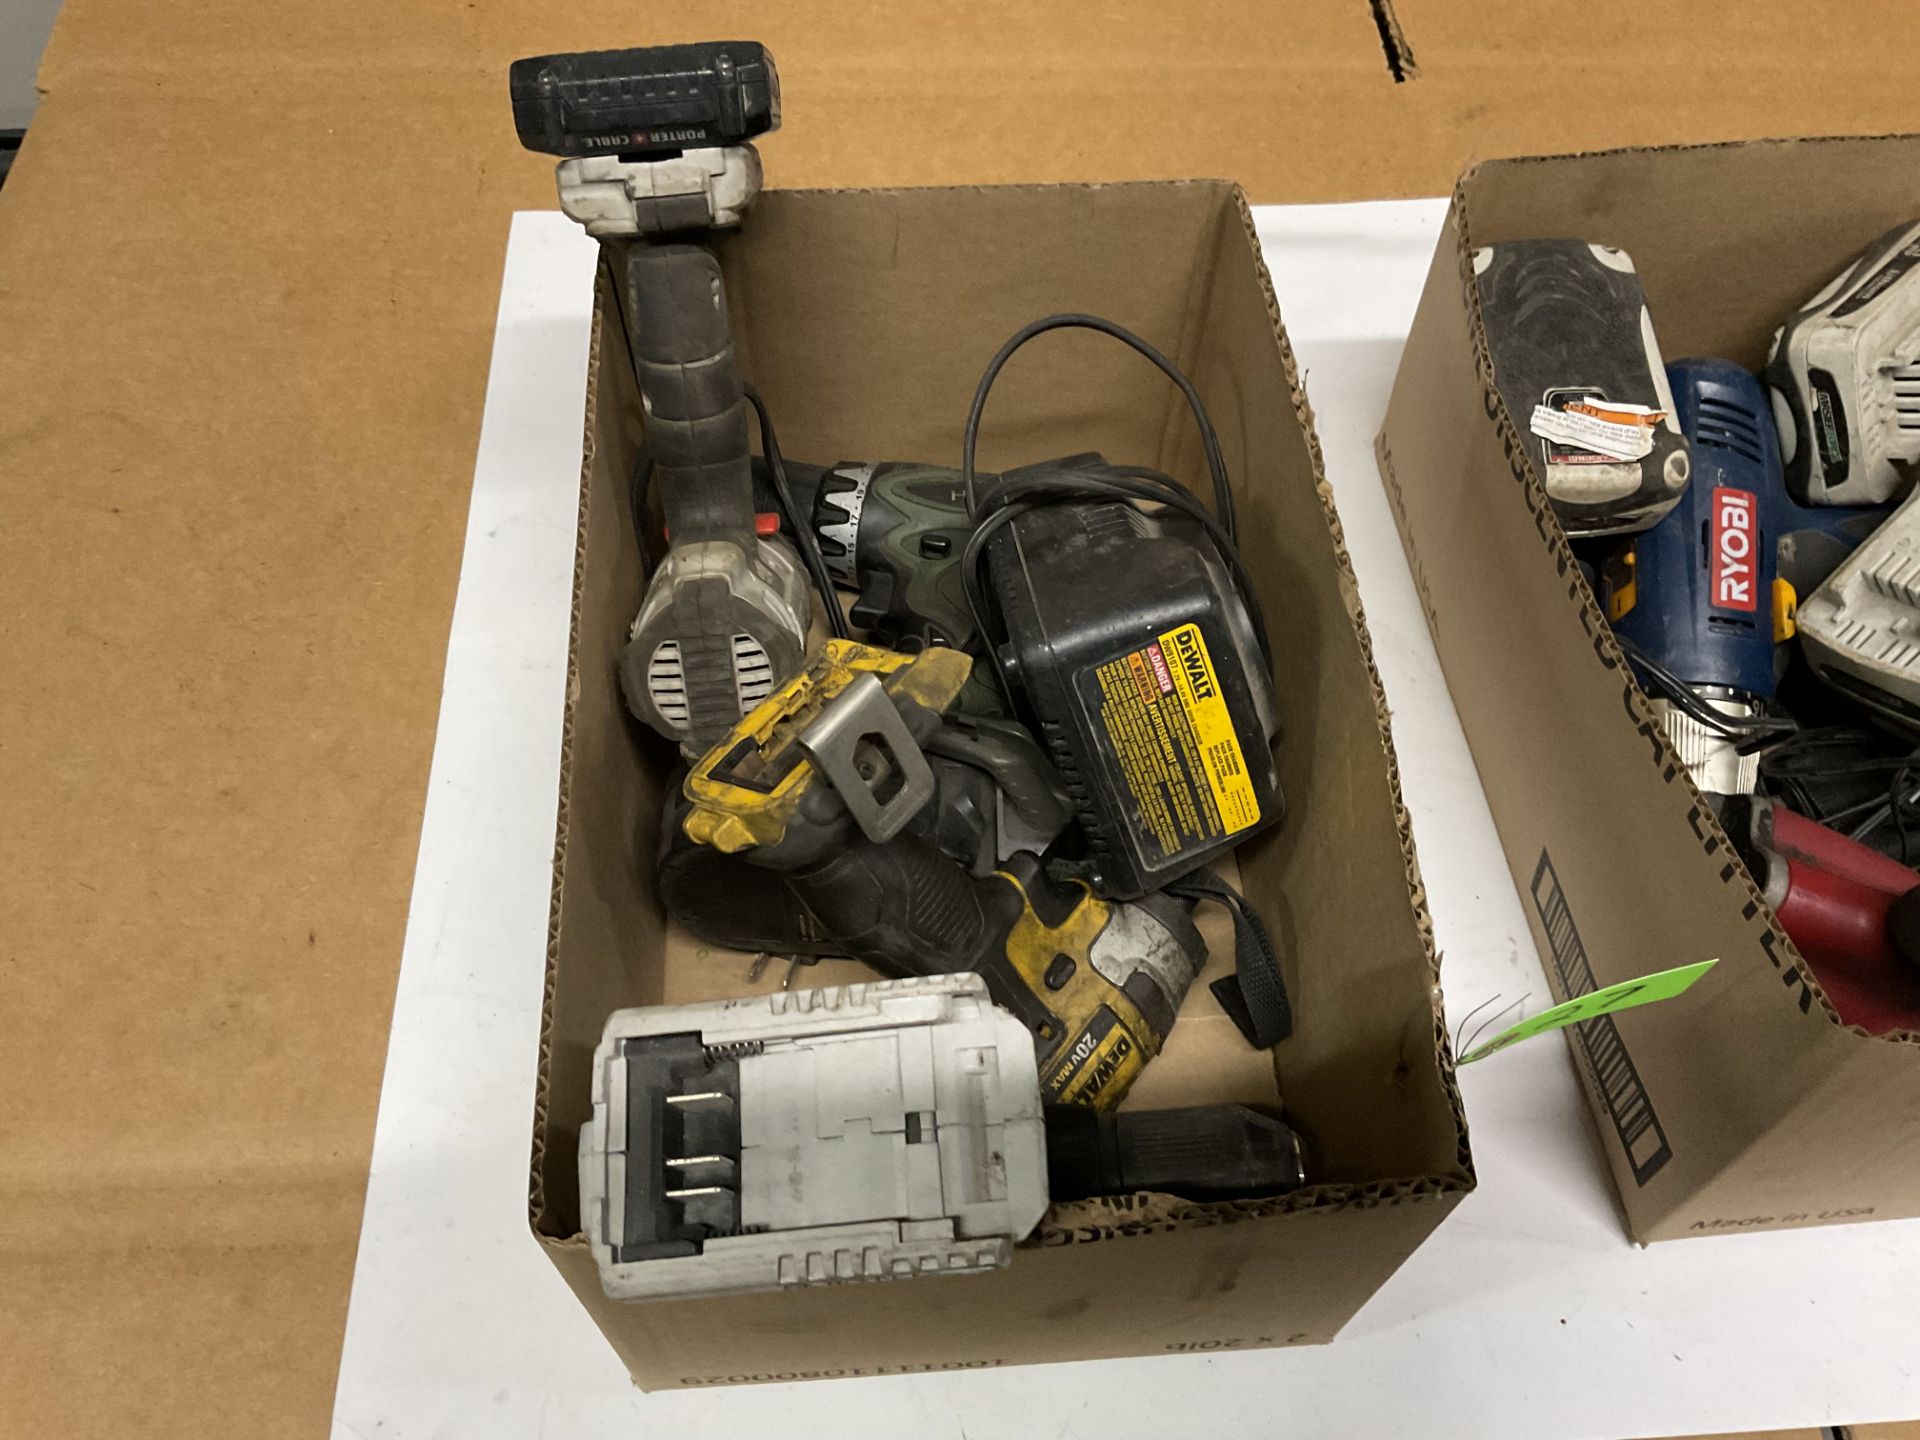 8 power drills and various battery packs , dewalt charger, air powered impact ratchet - Image 2 of 7